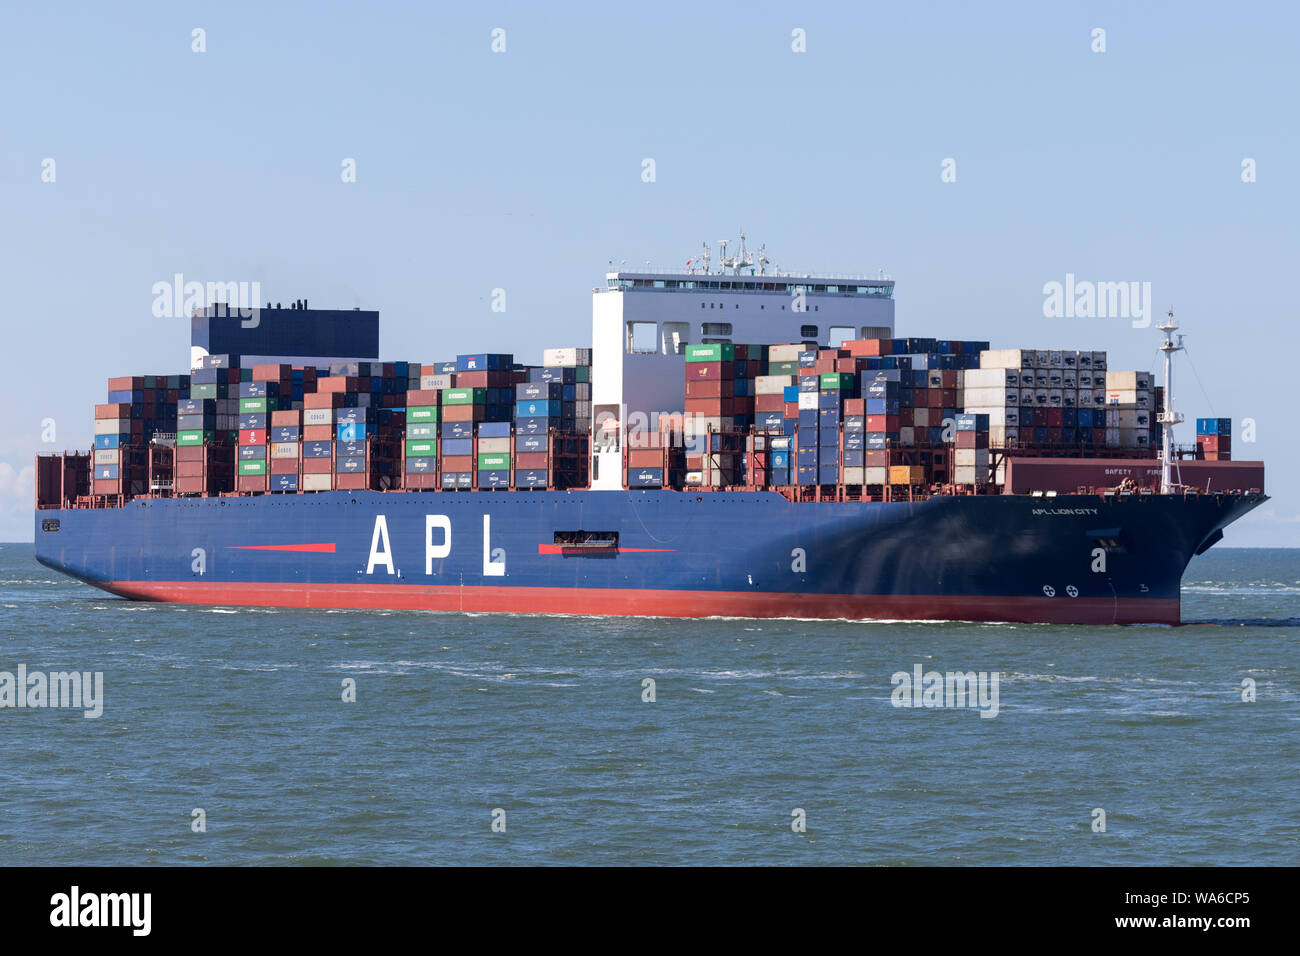 APL LION CITY inbound Rotterdam. APL,along with its parent company CMA CGM,is the world's third-largest container transportation and shipping company. Stock Photo